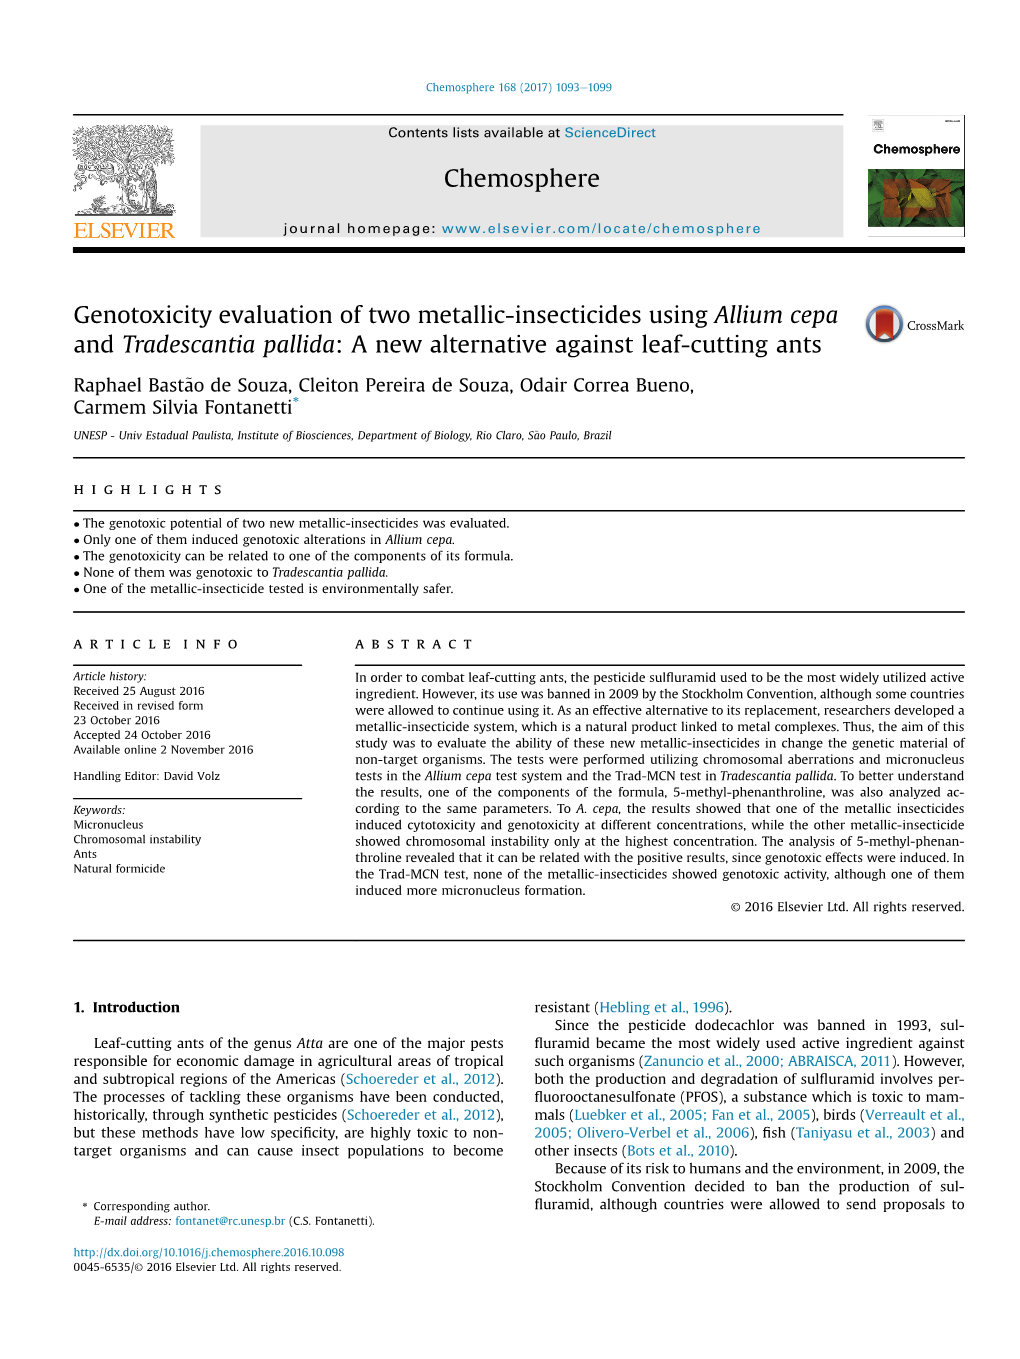 Genotoxicity Evaluation of Two Metallic-Insecticides Using Allium Cepa and Tradescantia Pallida: a New Alternative Against Leaf-Cutting Ants